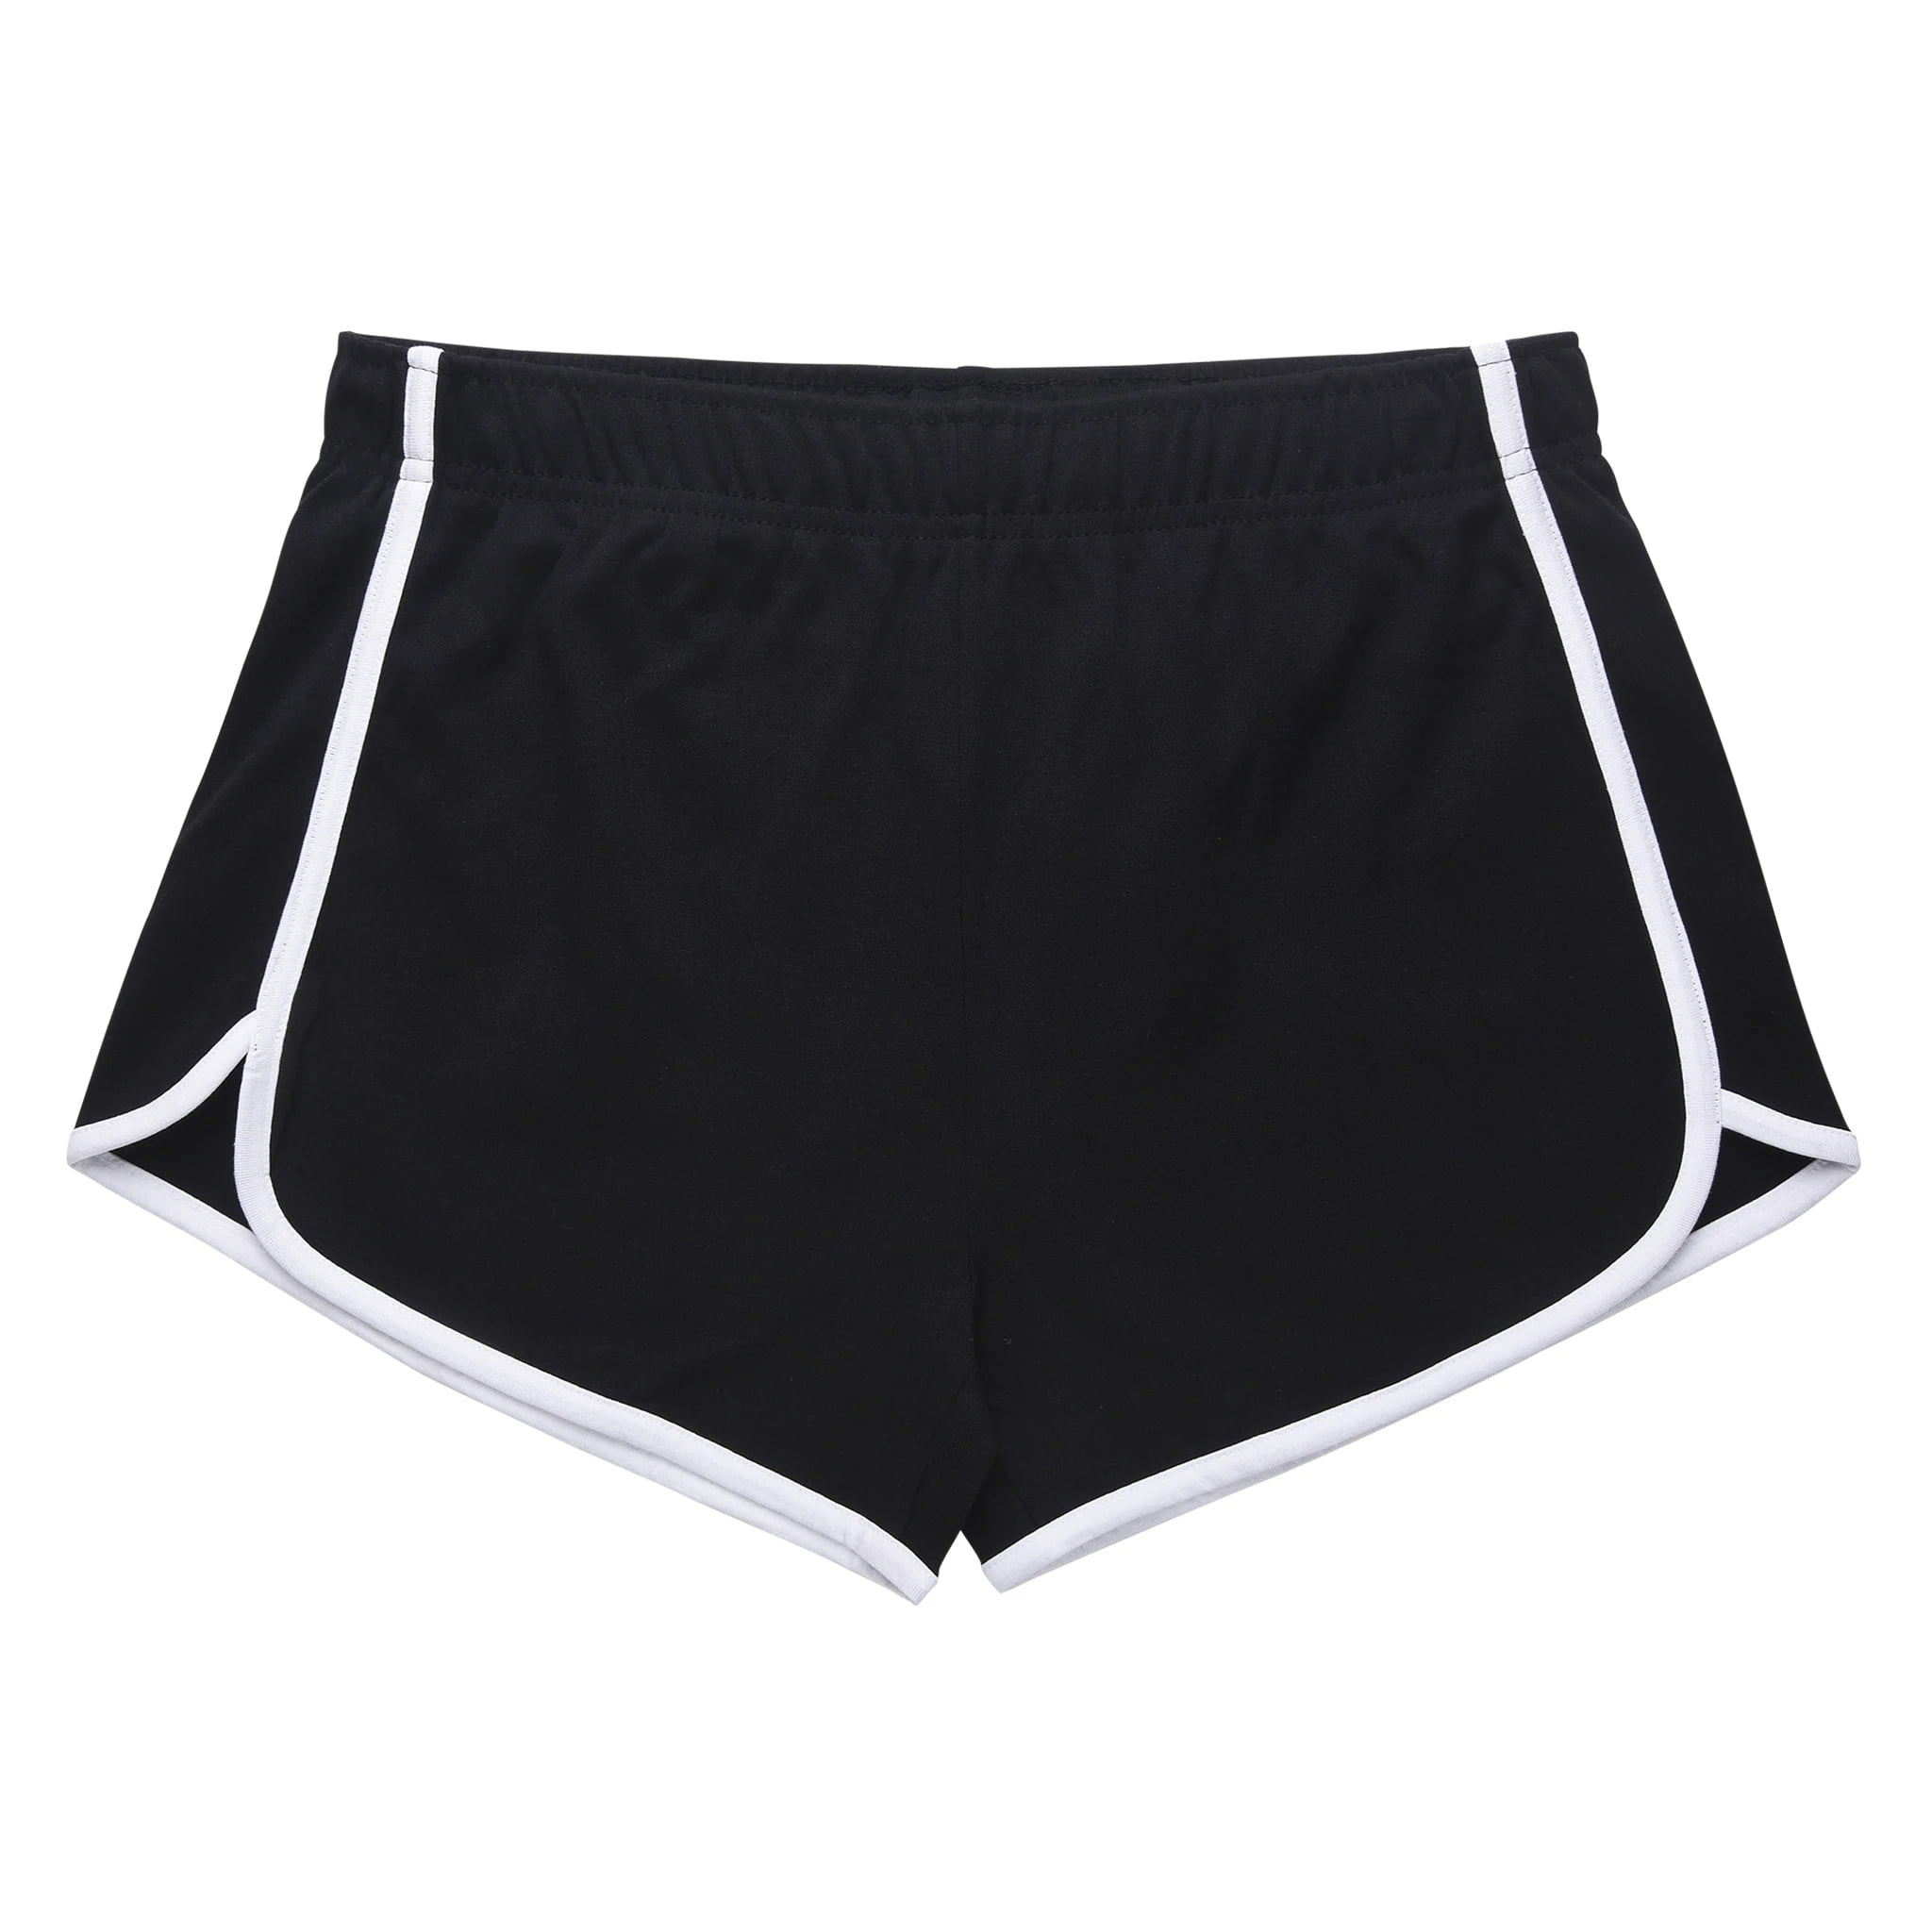 Women's Clearance Courtside Gym Short made with Organic Cotton